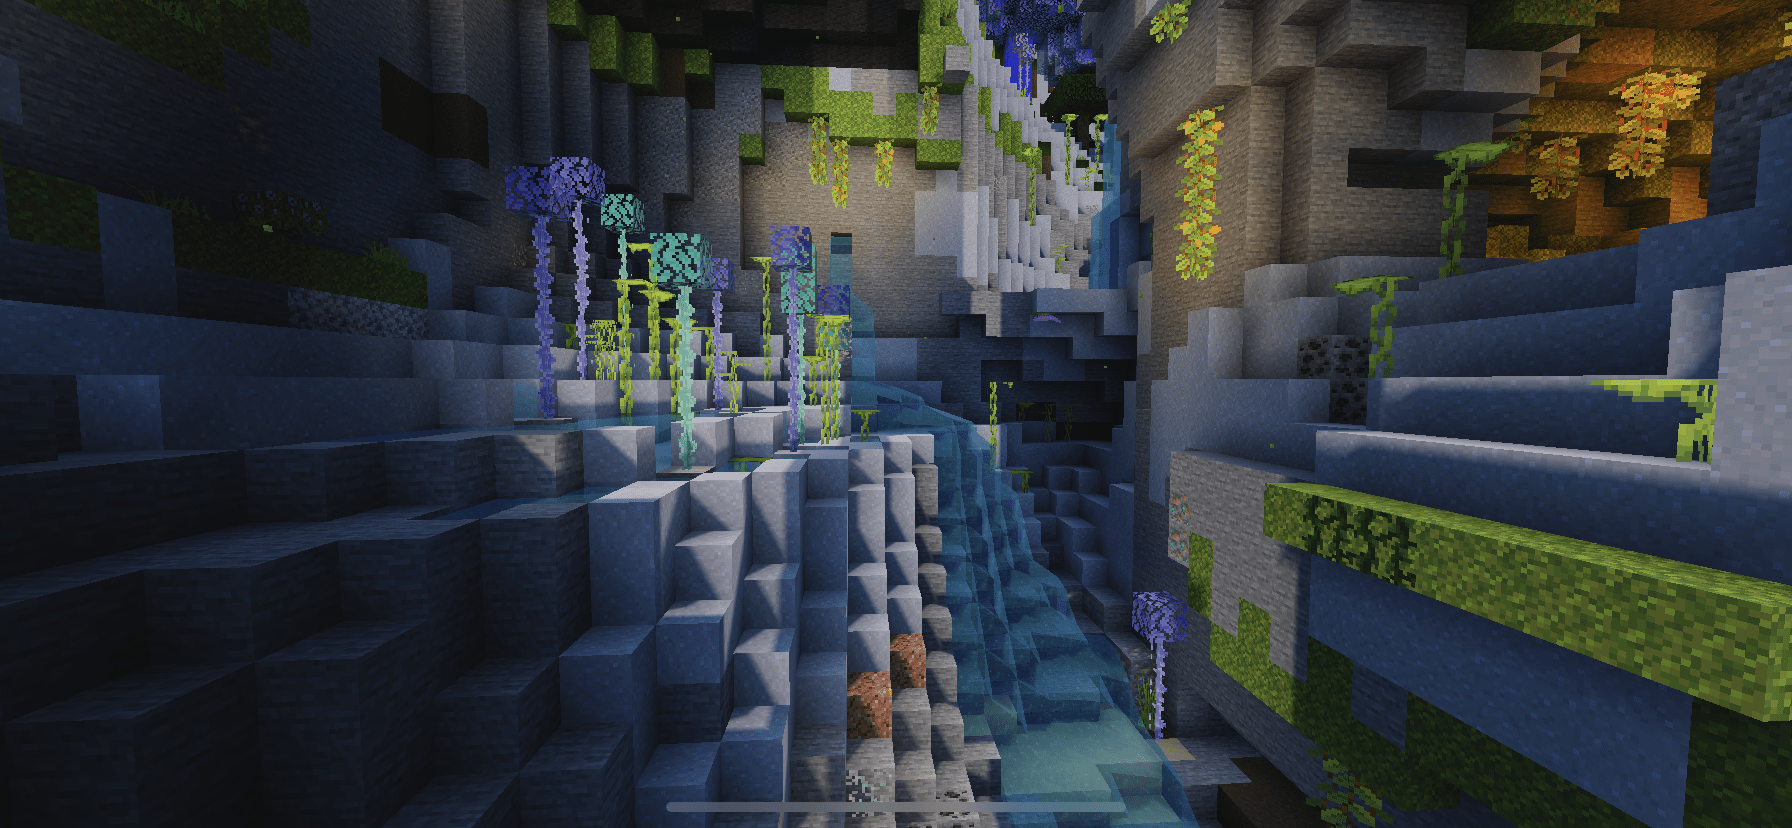 The Anthensy Expansion Addon for Minecraft